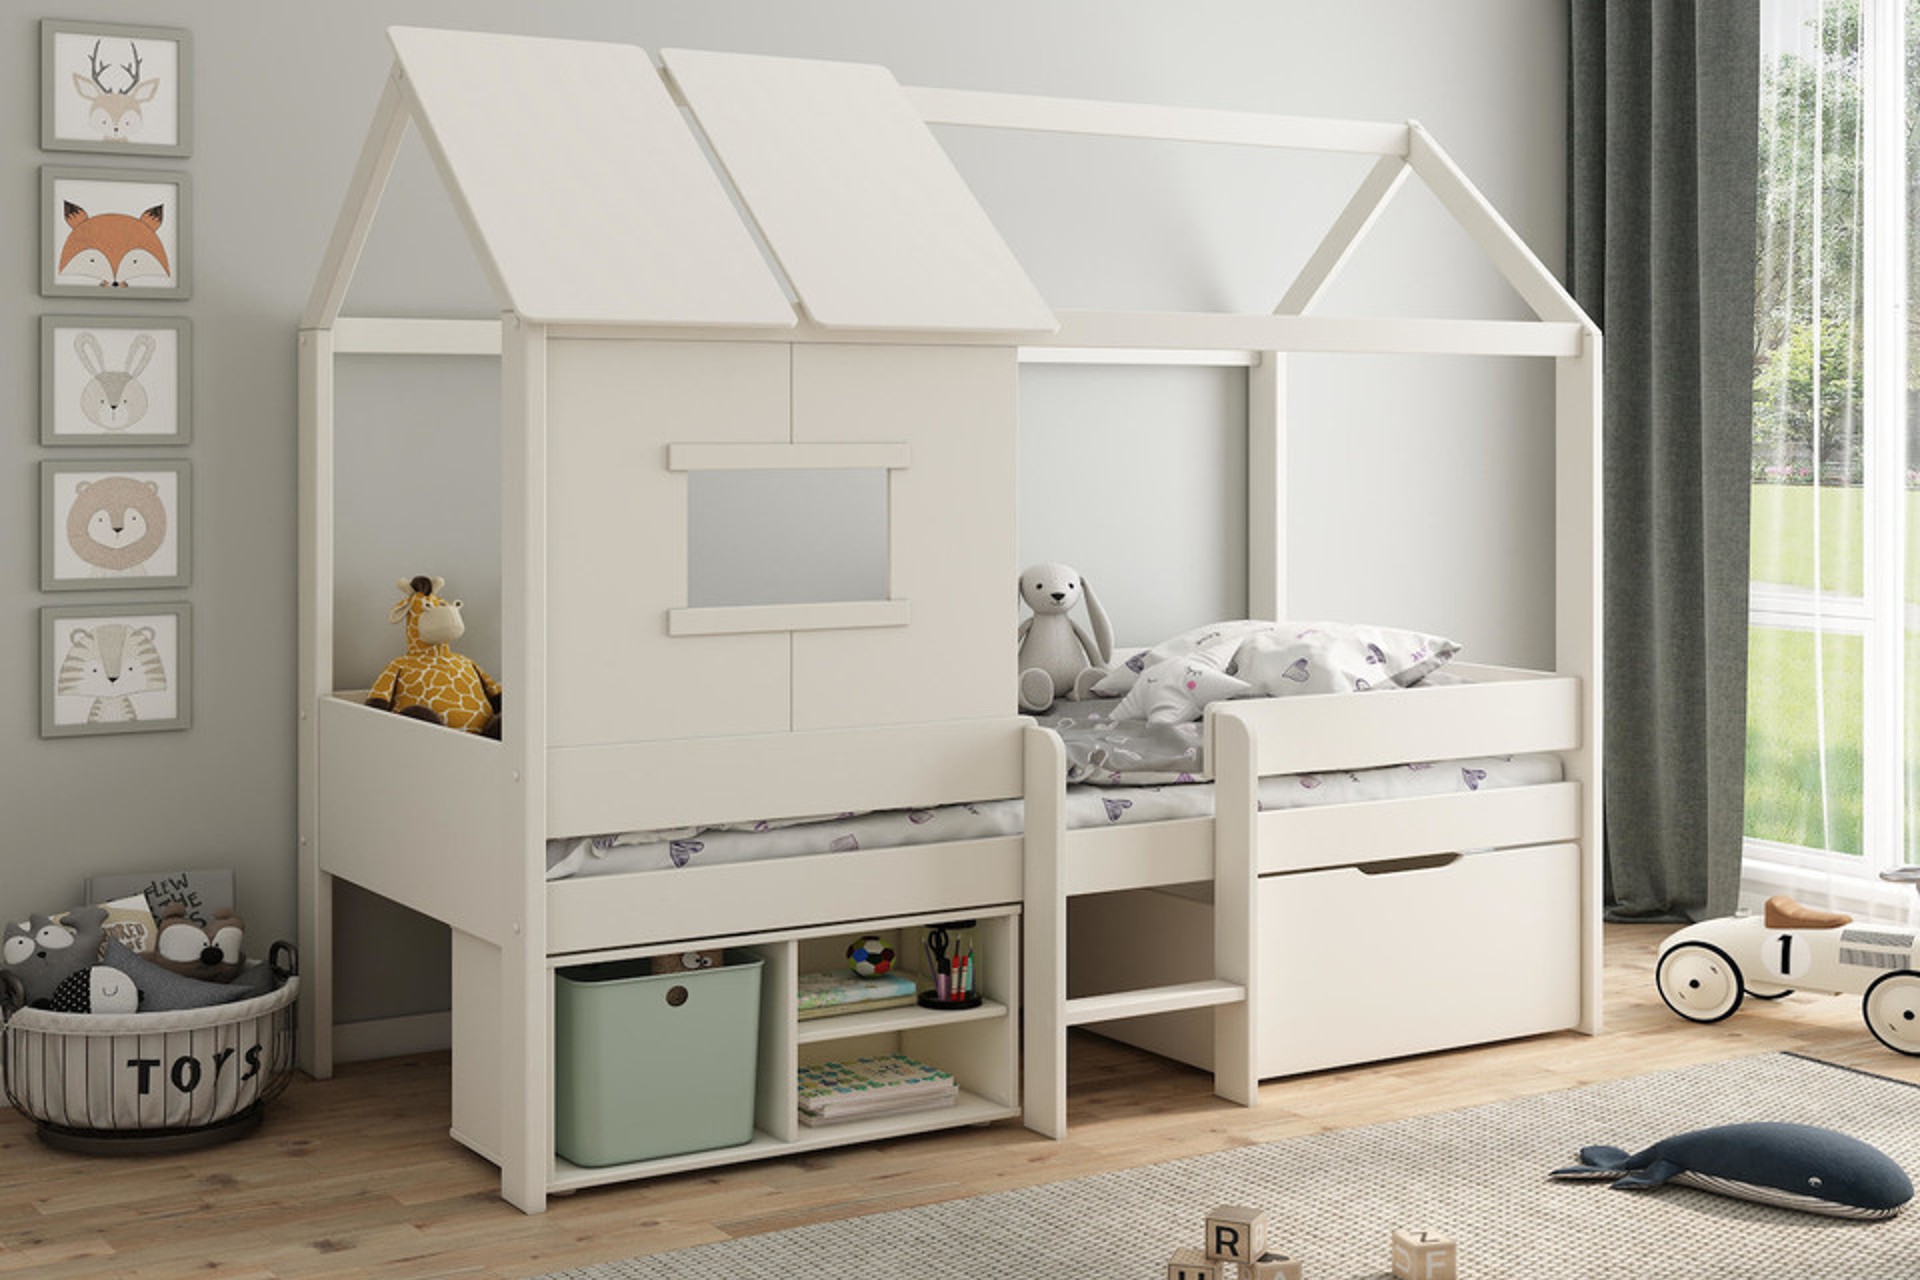 Skye white Playhouse Midsleeper Bedframe with storage drawers, shelves and a Mattress